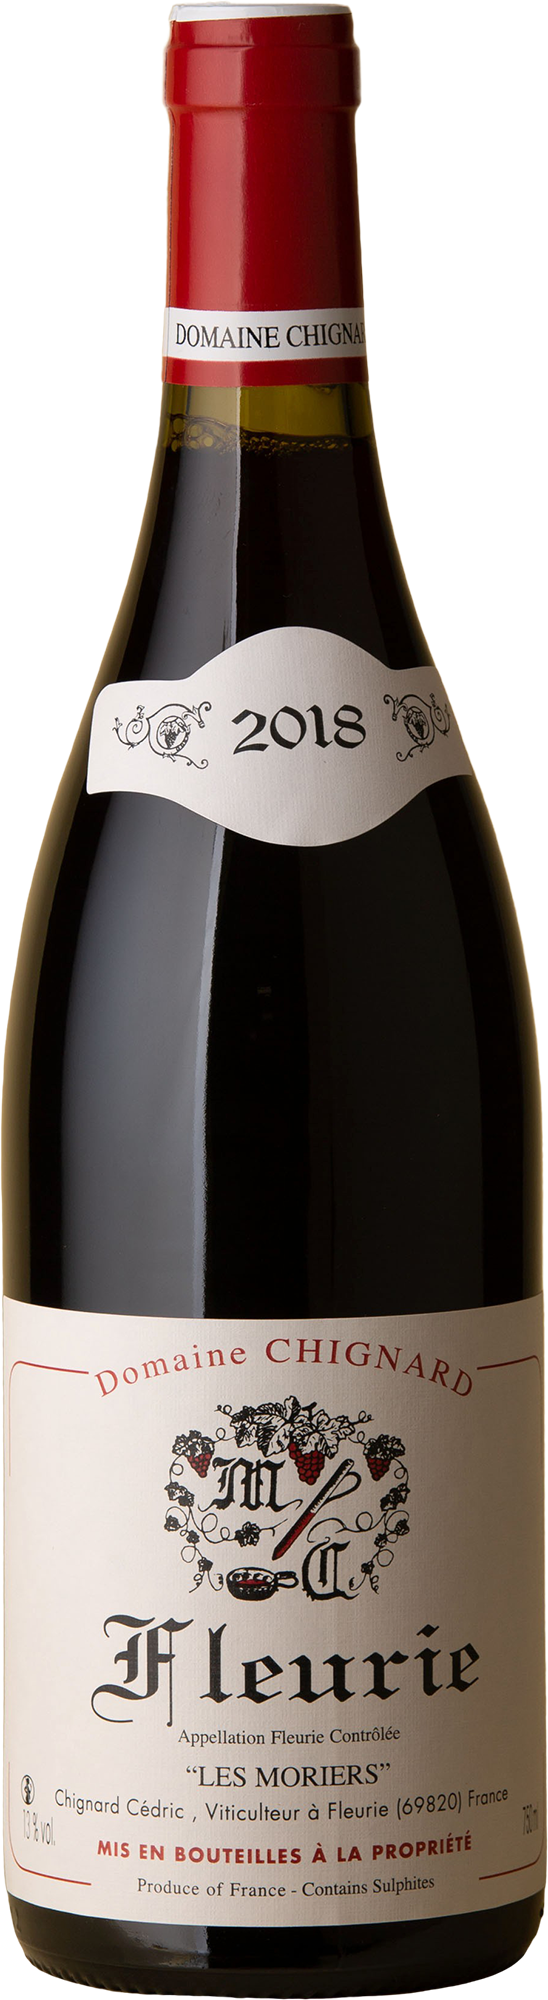 Domaine Chignard - Les Moriers' Gamay 2018 Red Wine